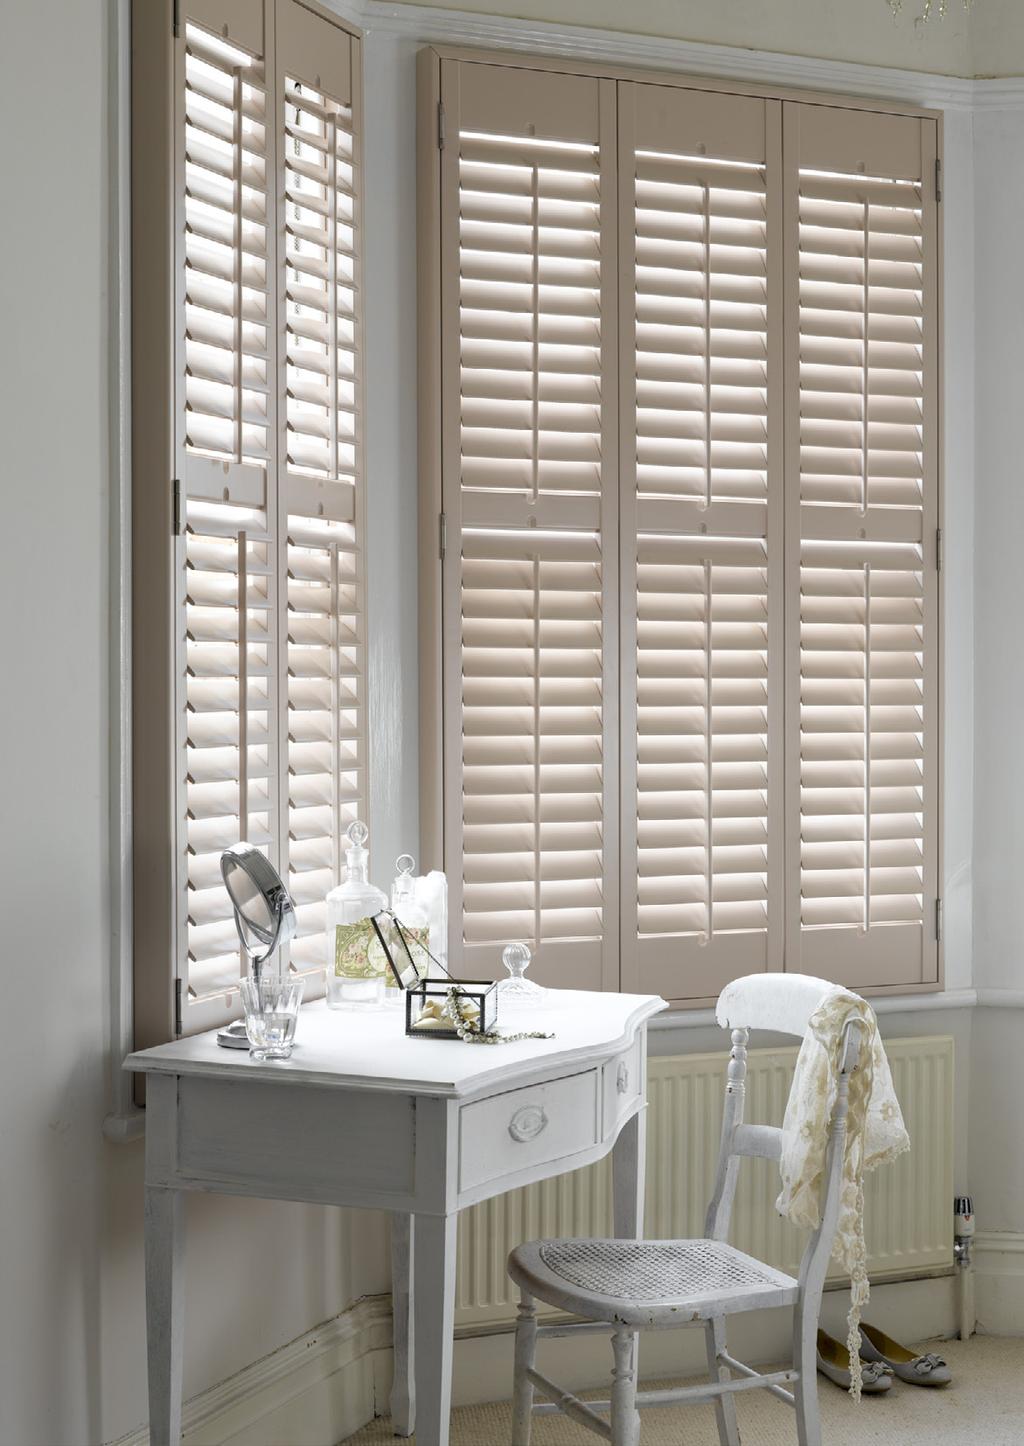 OUR PRODUCTS Our suppliers design and install only the highest quality shutters. Each window in any home is different from the next and all products are tailor made to precisely fit each window.